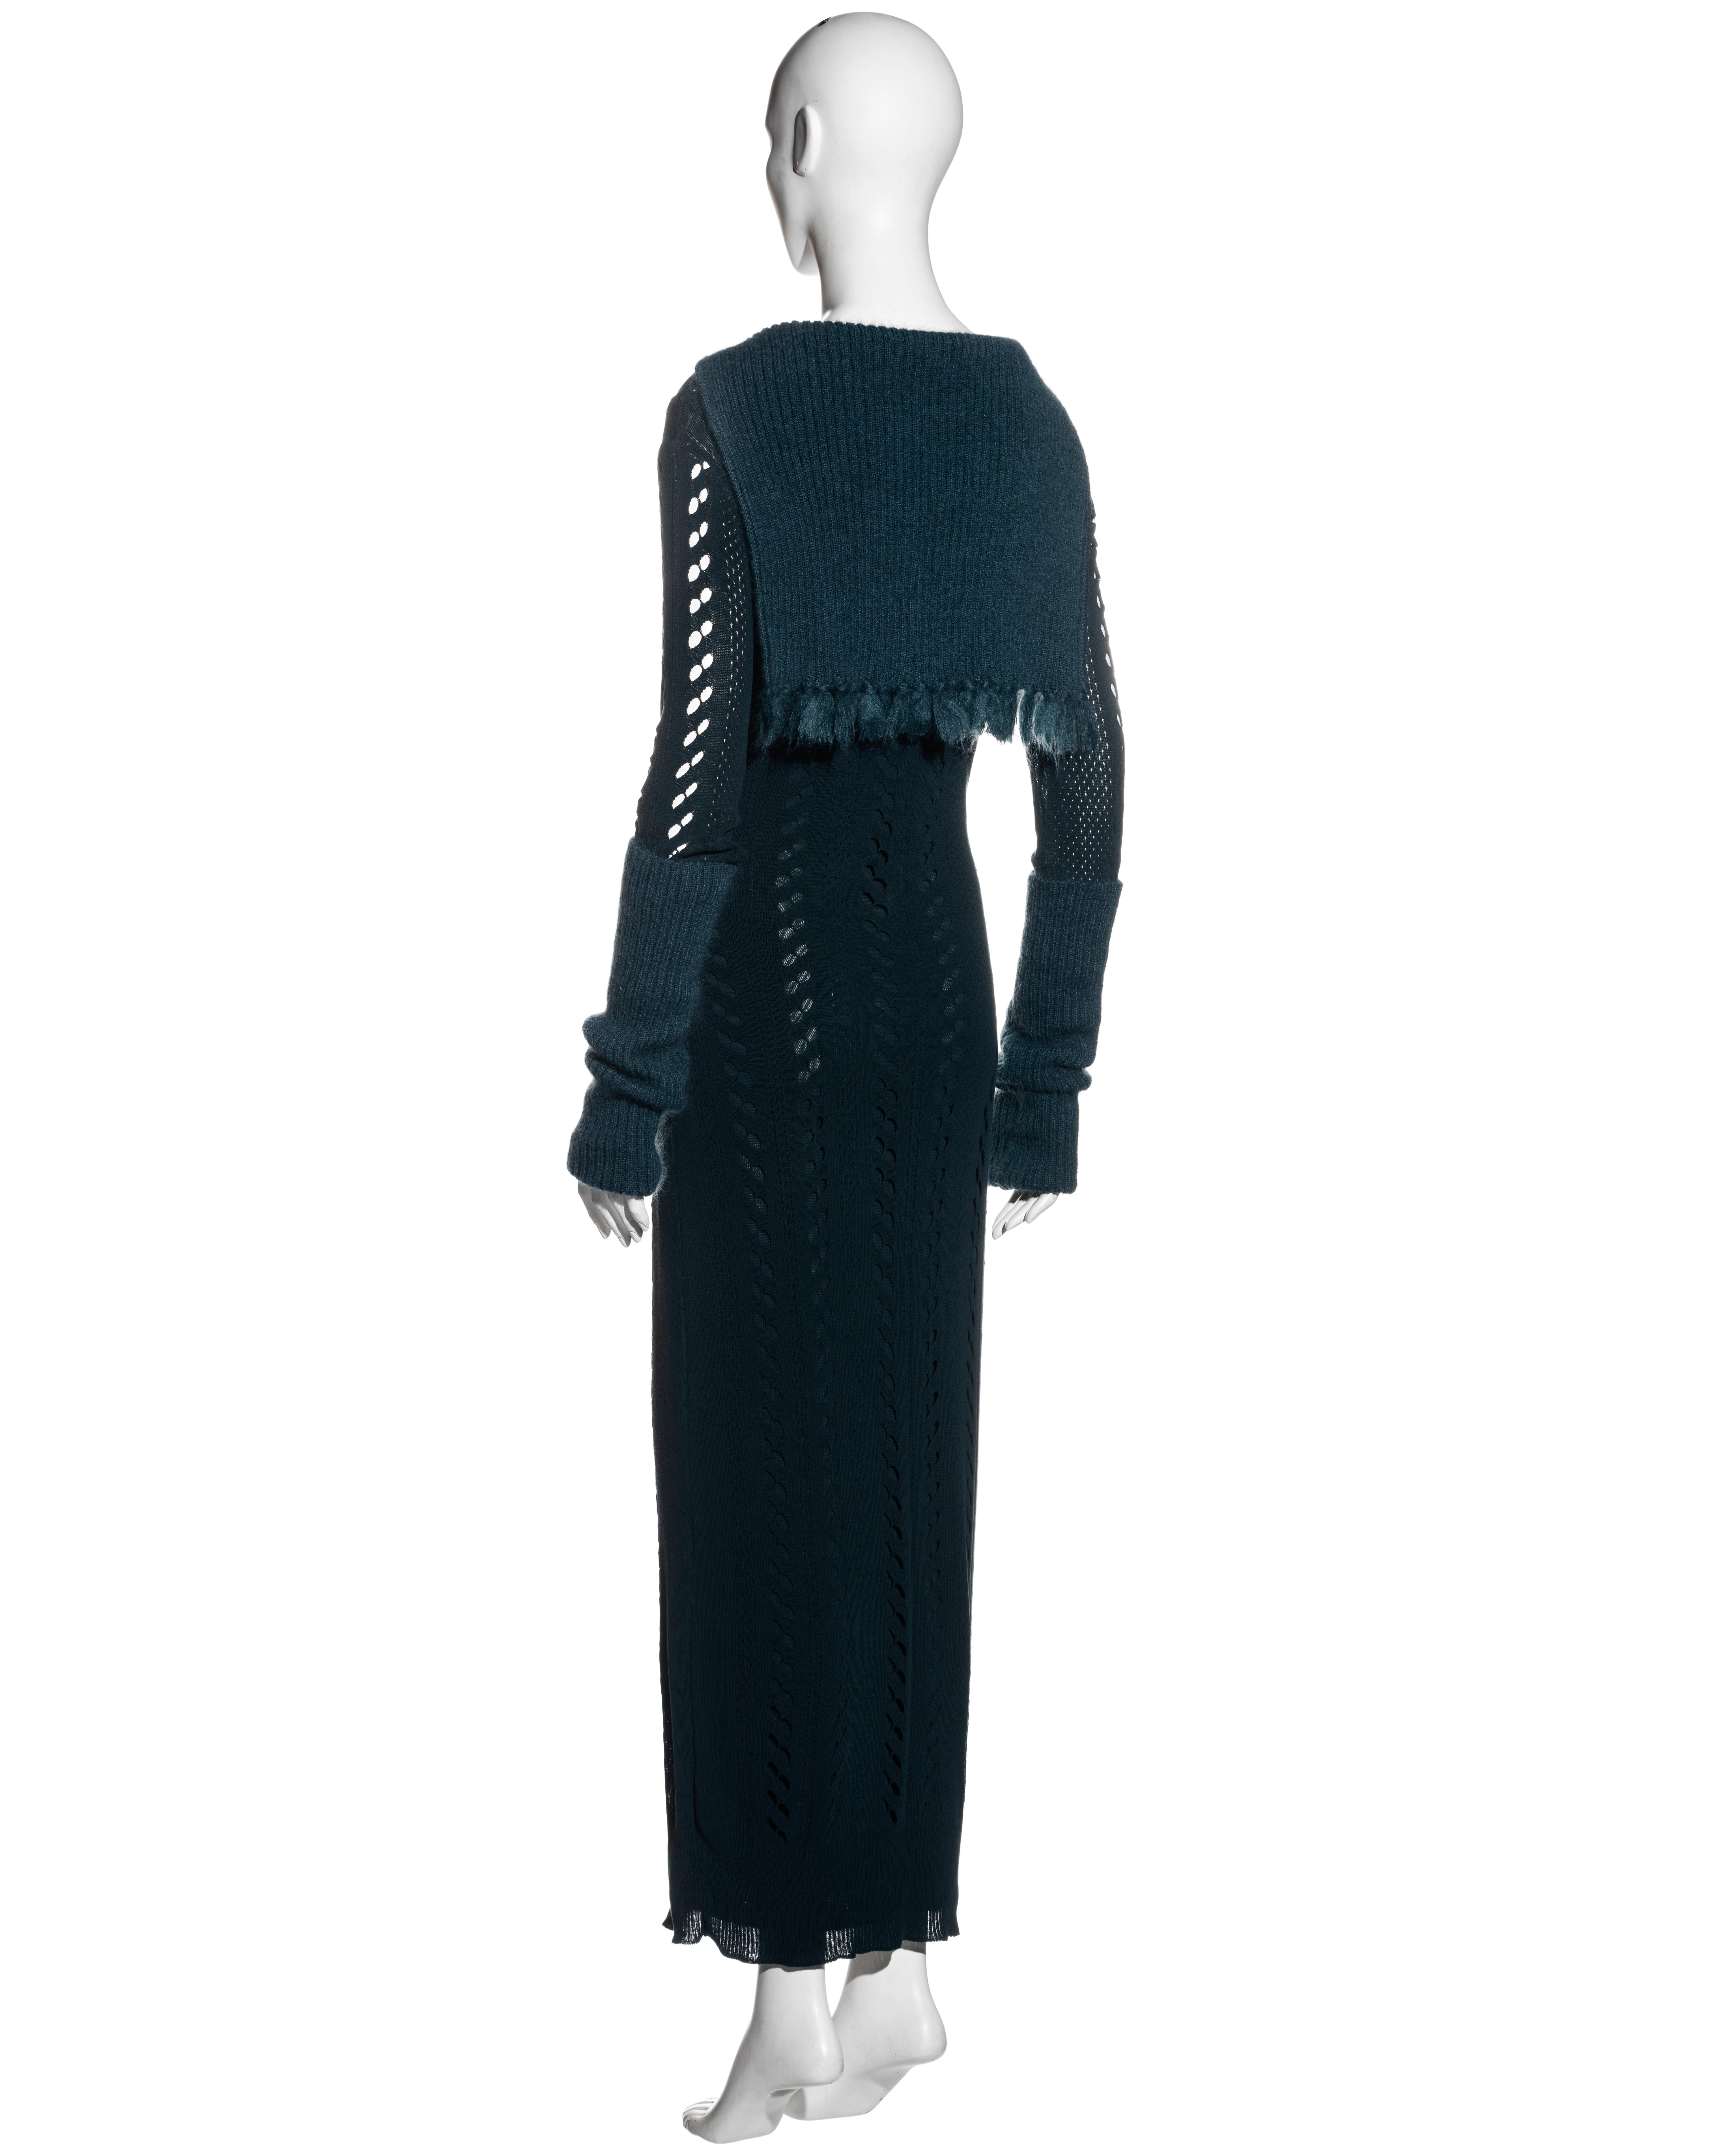 Christian Dior by John Galliano teal laser cut knitted maxi dress, fw 1999 4